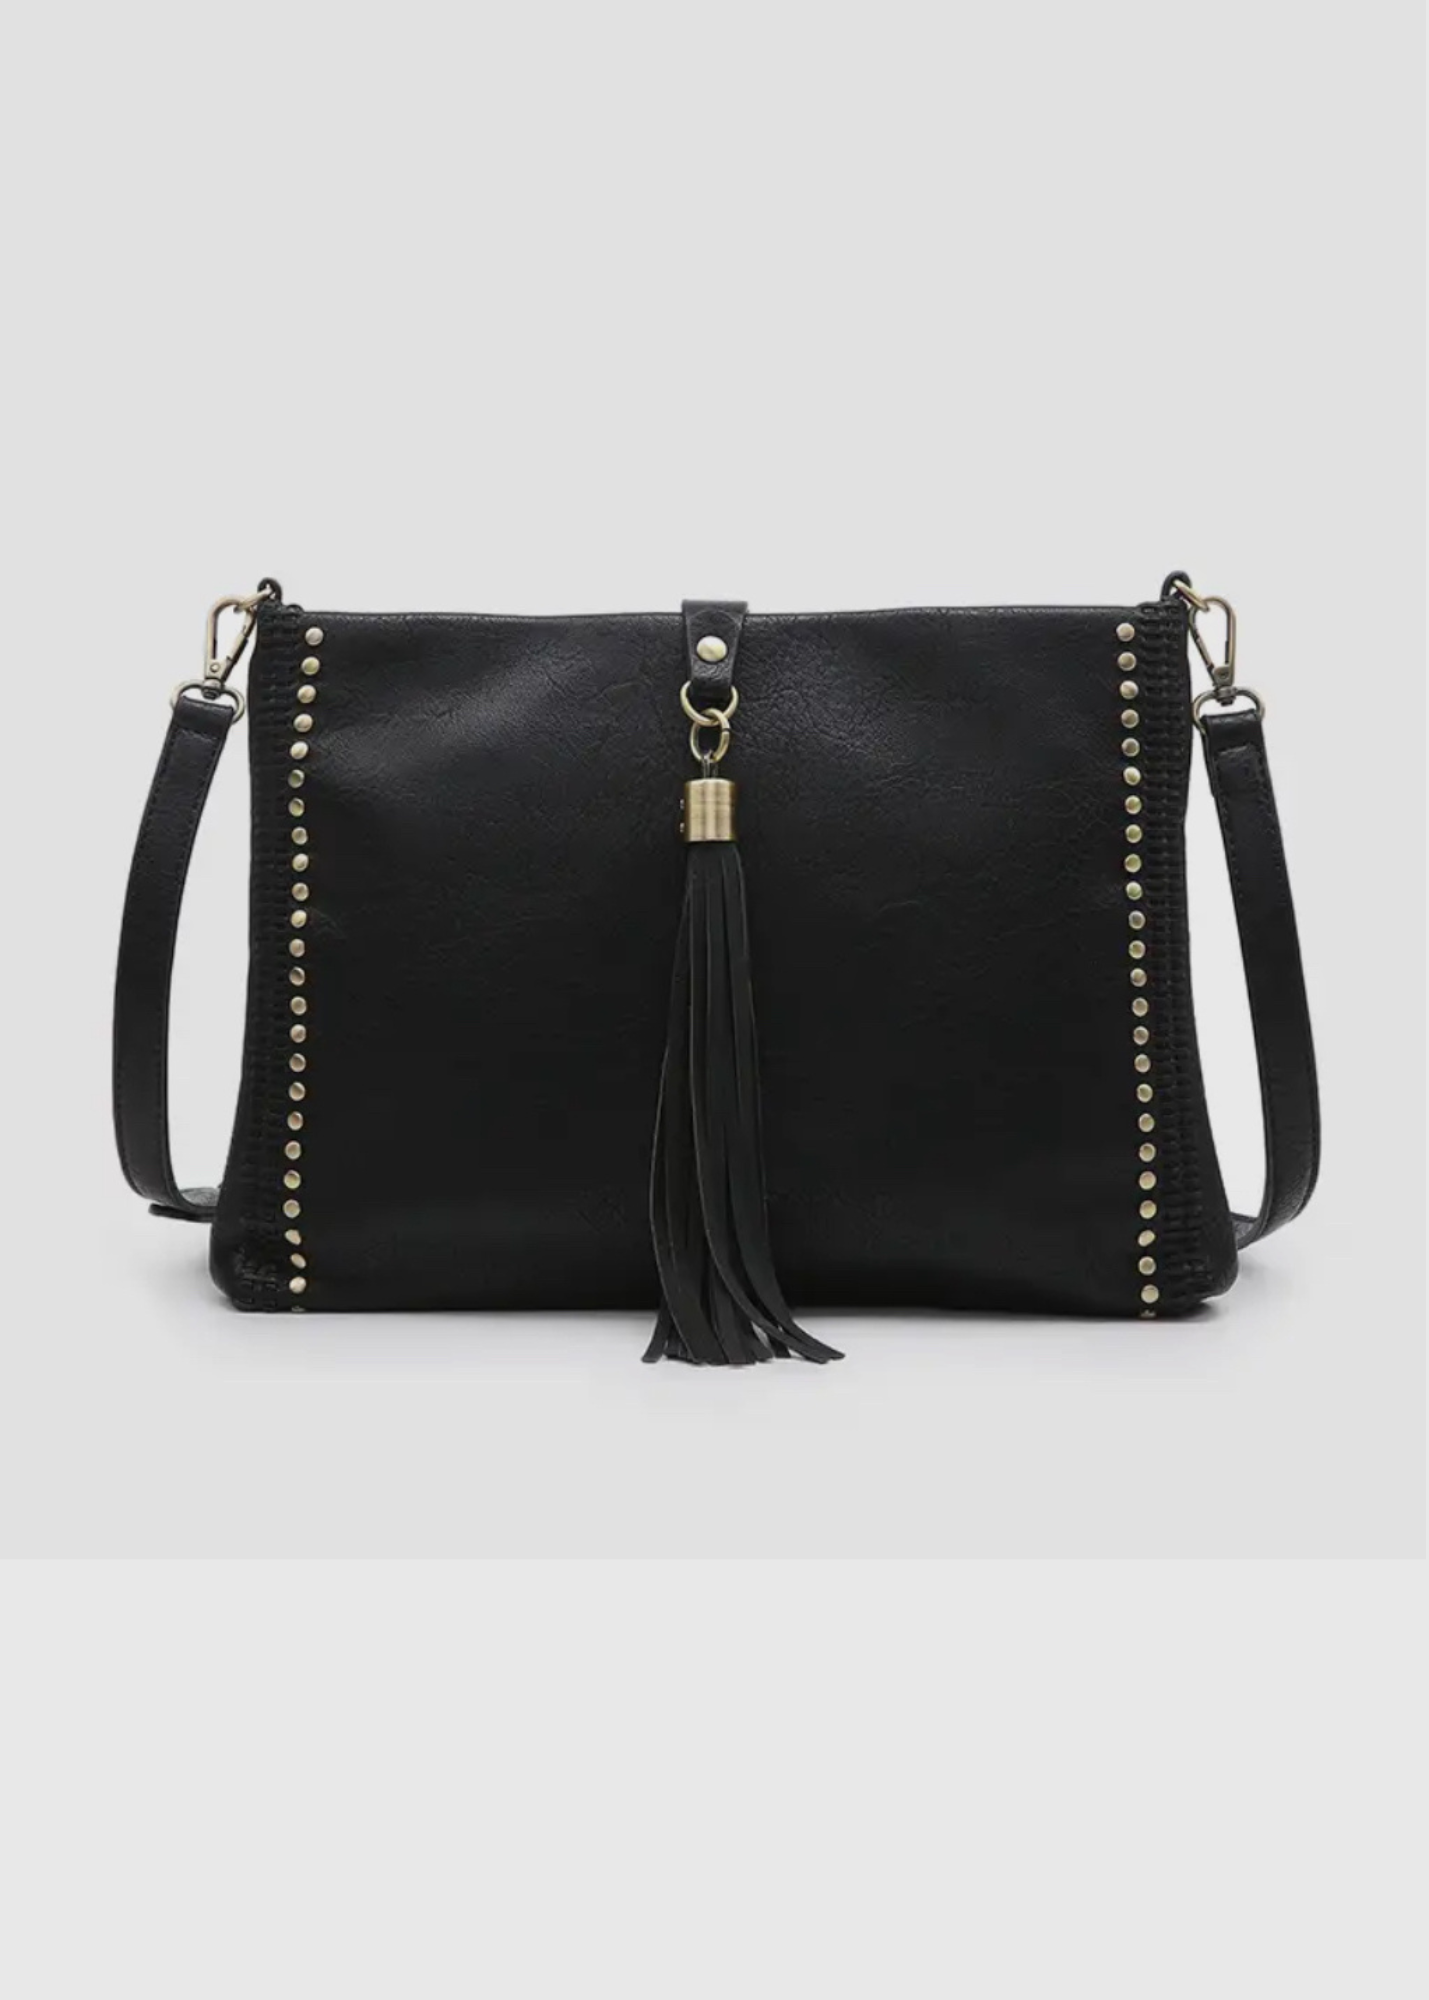 black purse made of soft vegan leather. Purse is rectangular with silver studs going up the sides and a ling tassel wit silver hardware that folds over the top to close purse. Strap is crossbody length and is adjustable. 